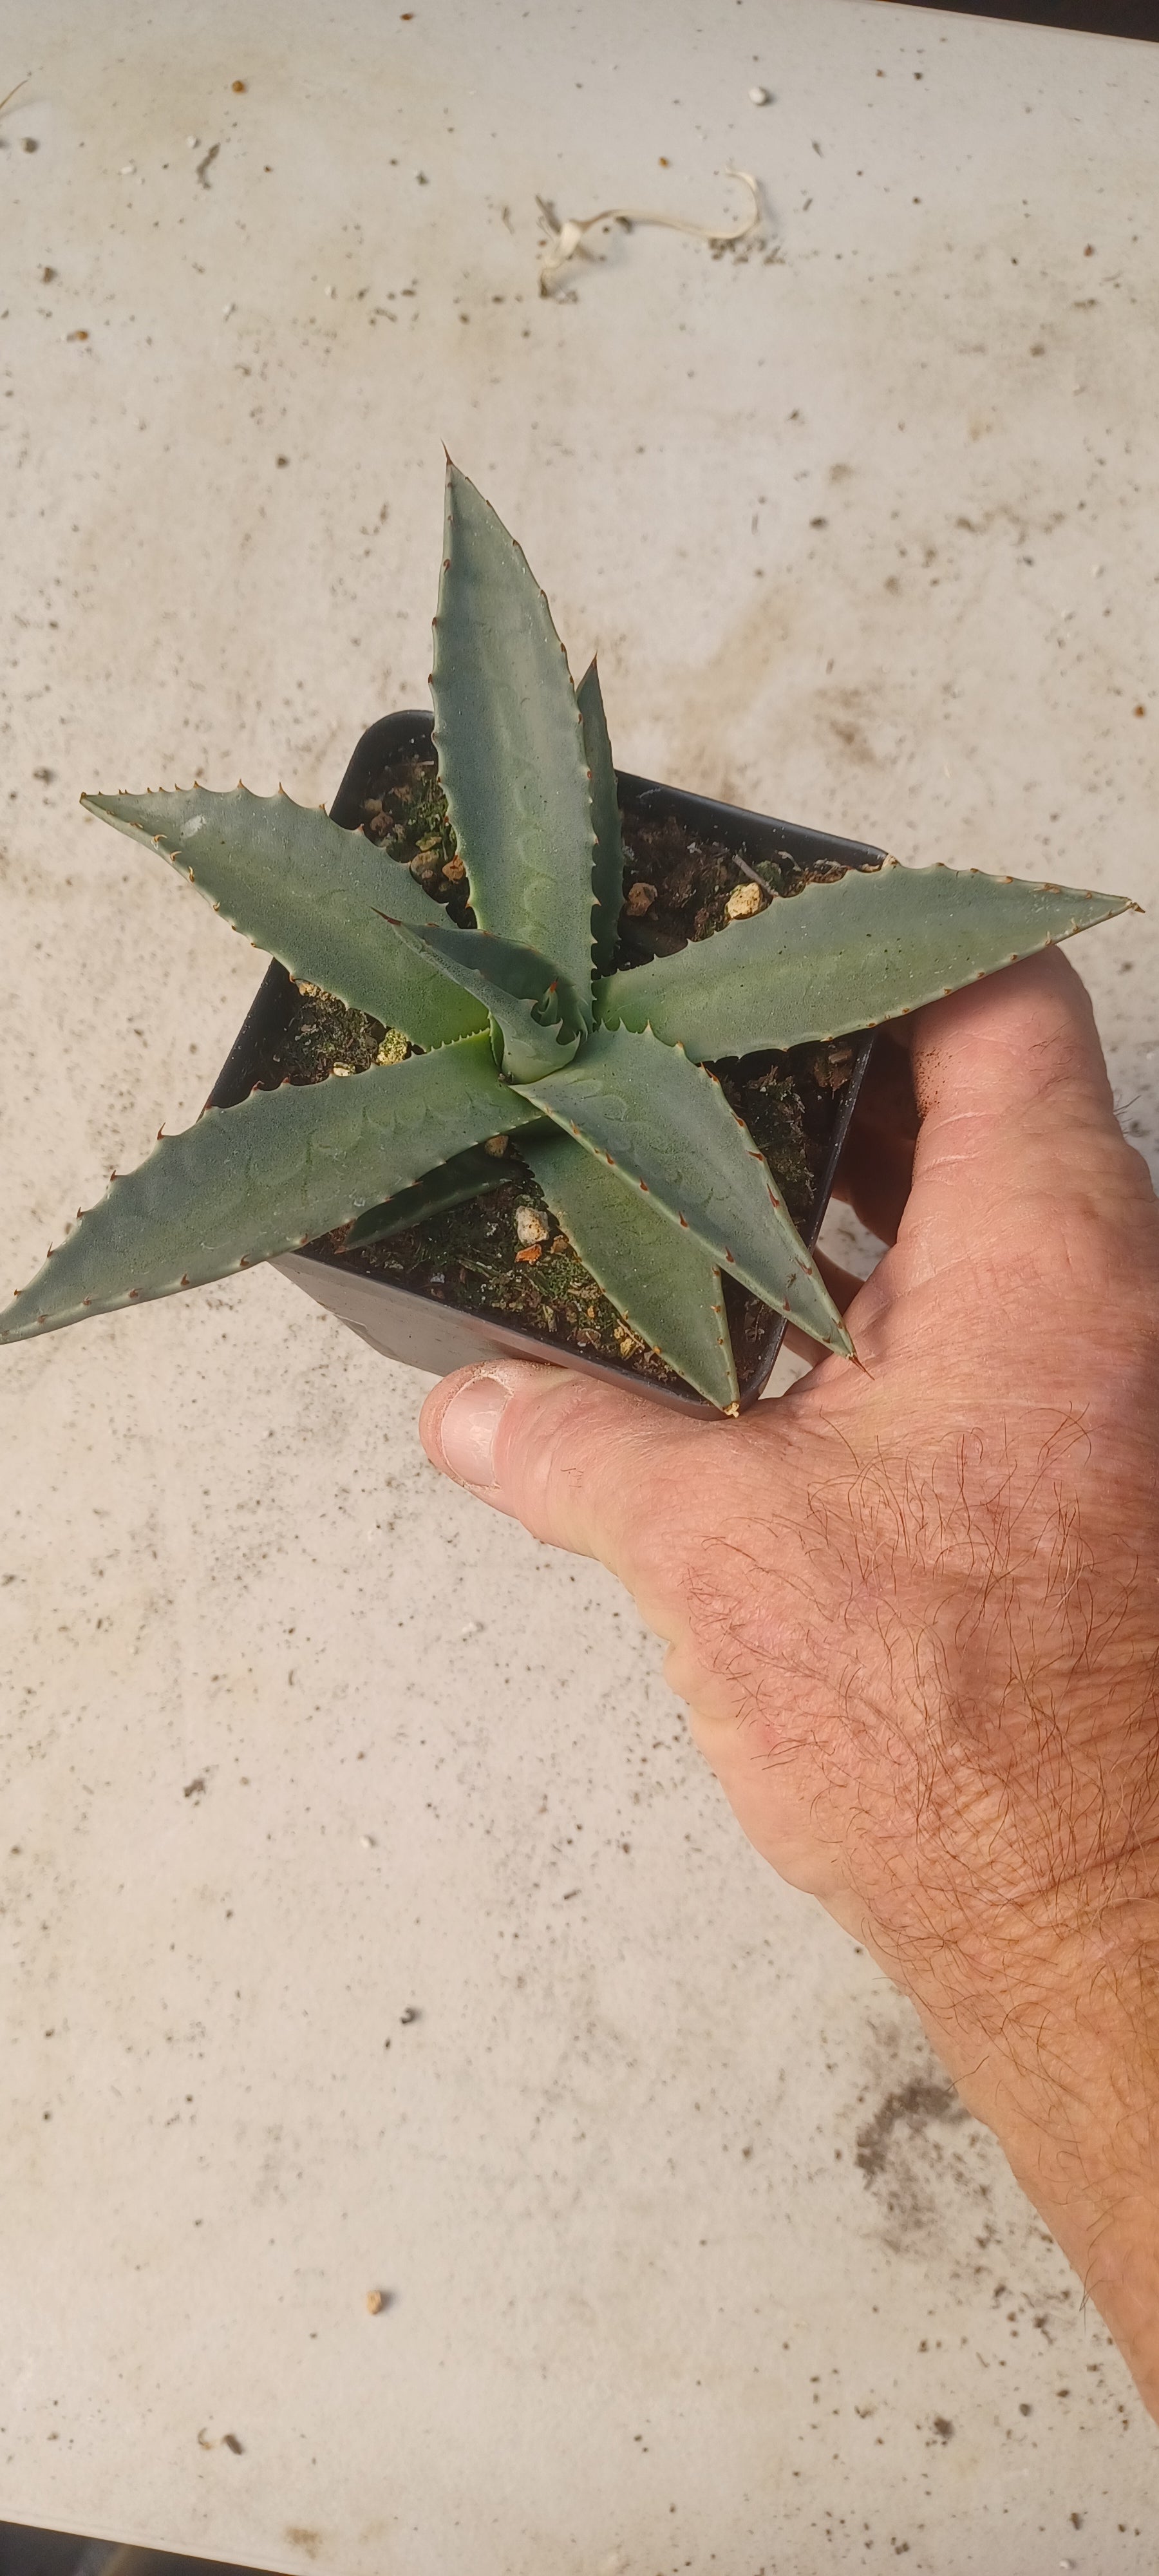 AG001: Agave parryi v neomexicana COLD HARDY CACTUS – COLDHARDYCACTUS